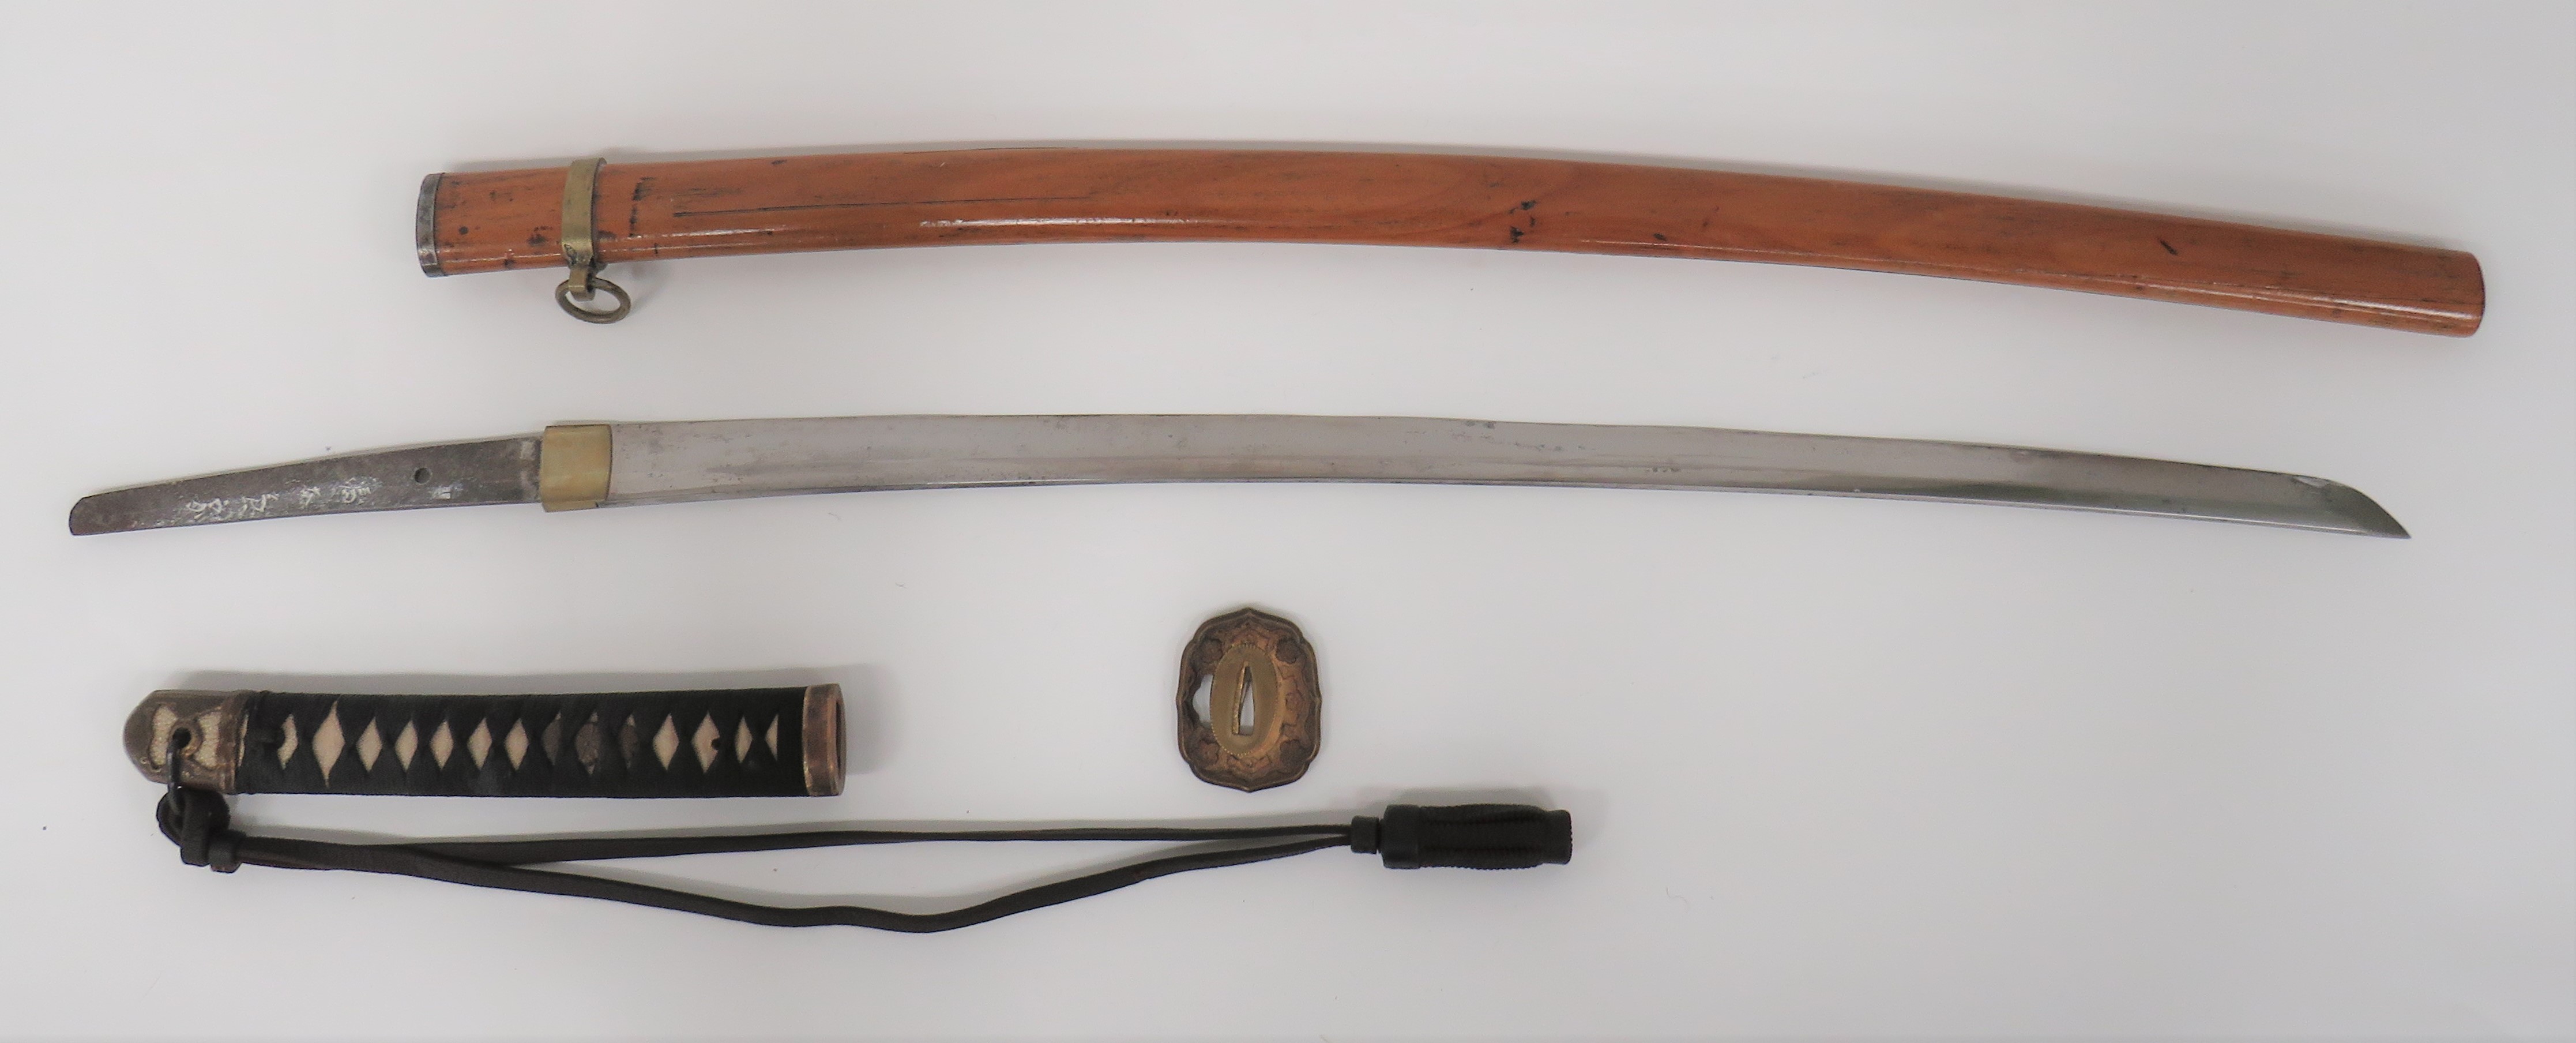 WW2 Military Mounted Japanese Officer's Katana Sword With Signed Tang 27 inch, single edged blade